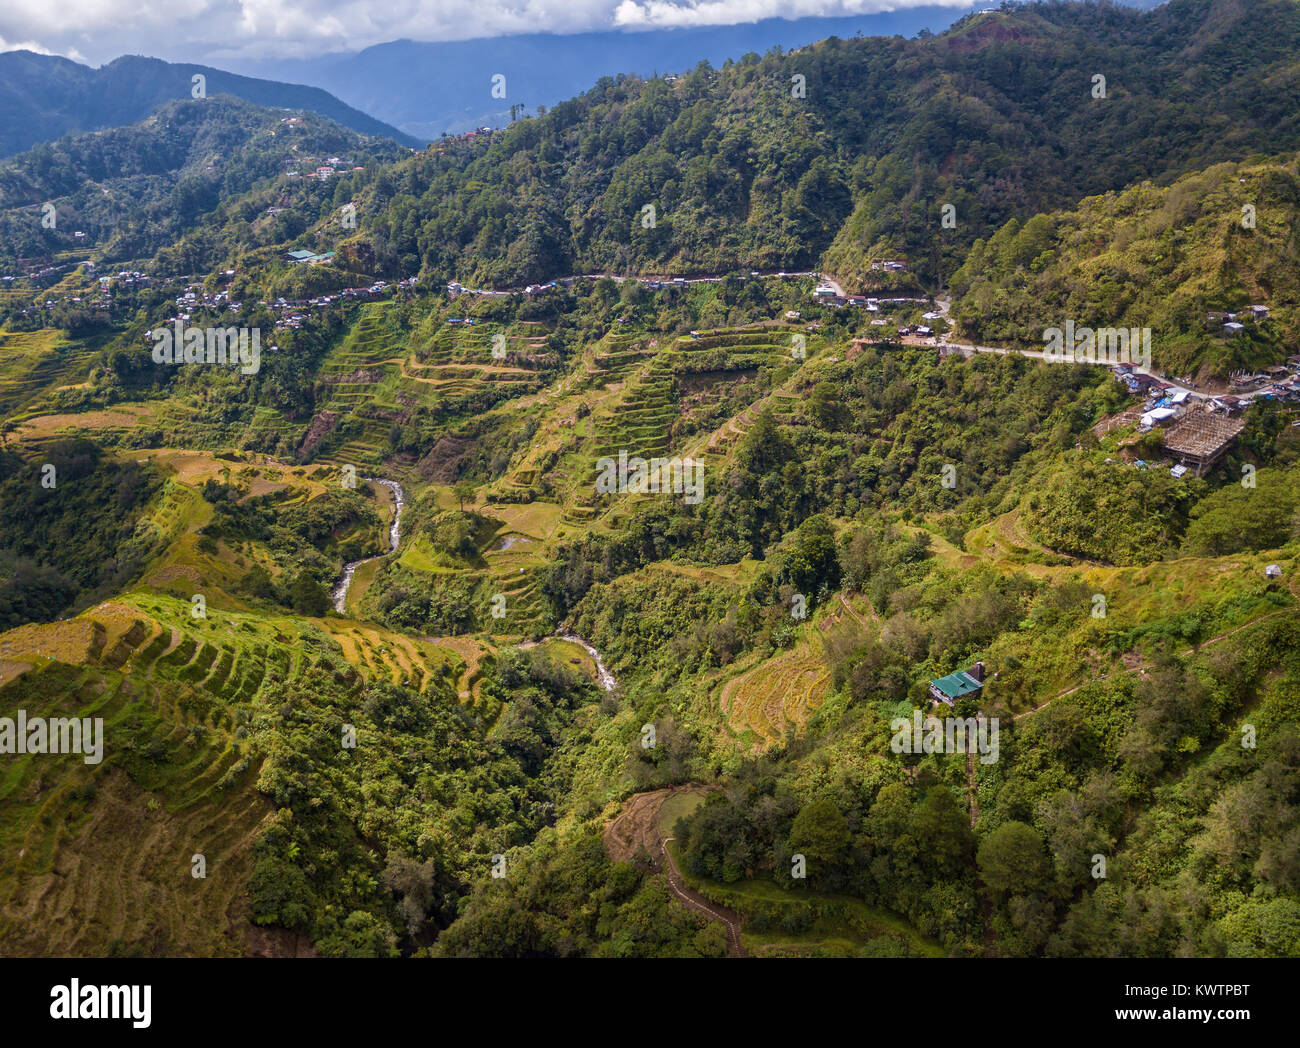 Rice terraces at Banaue View Point on the island of Luzon, Philippines Stock Photo